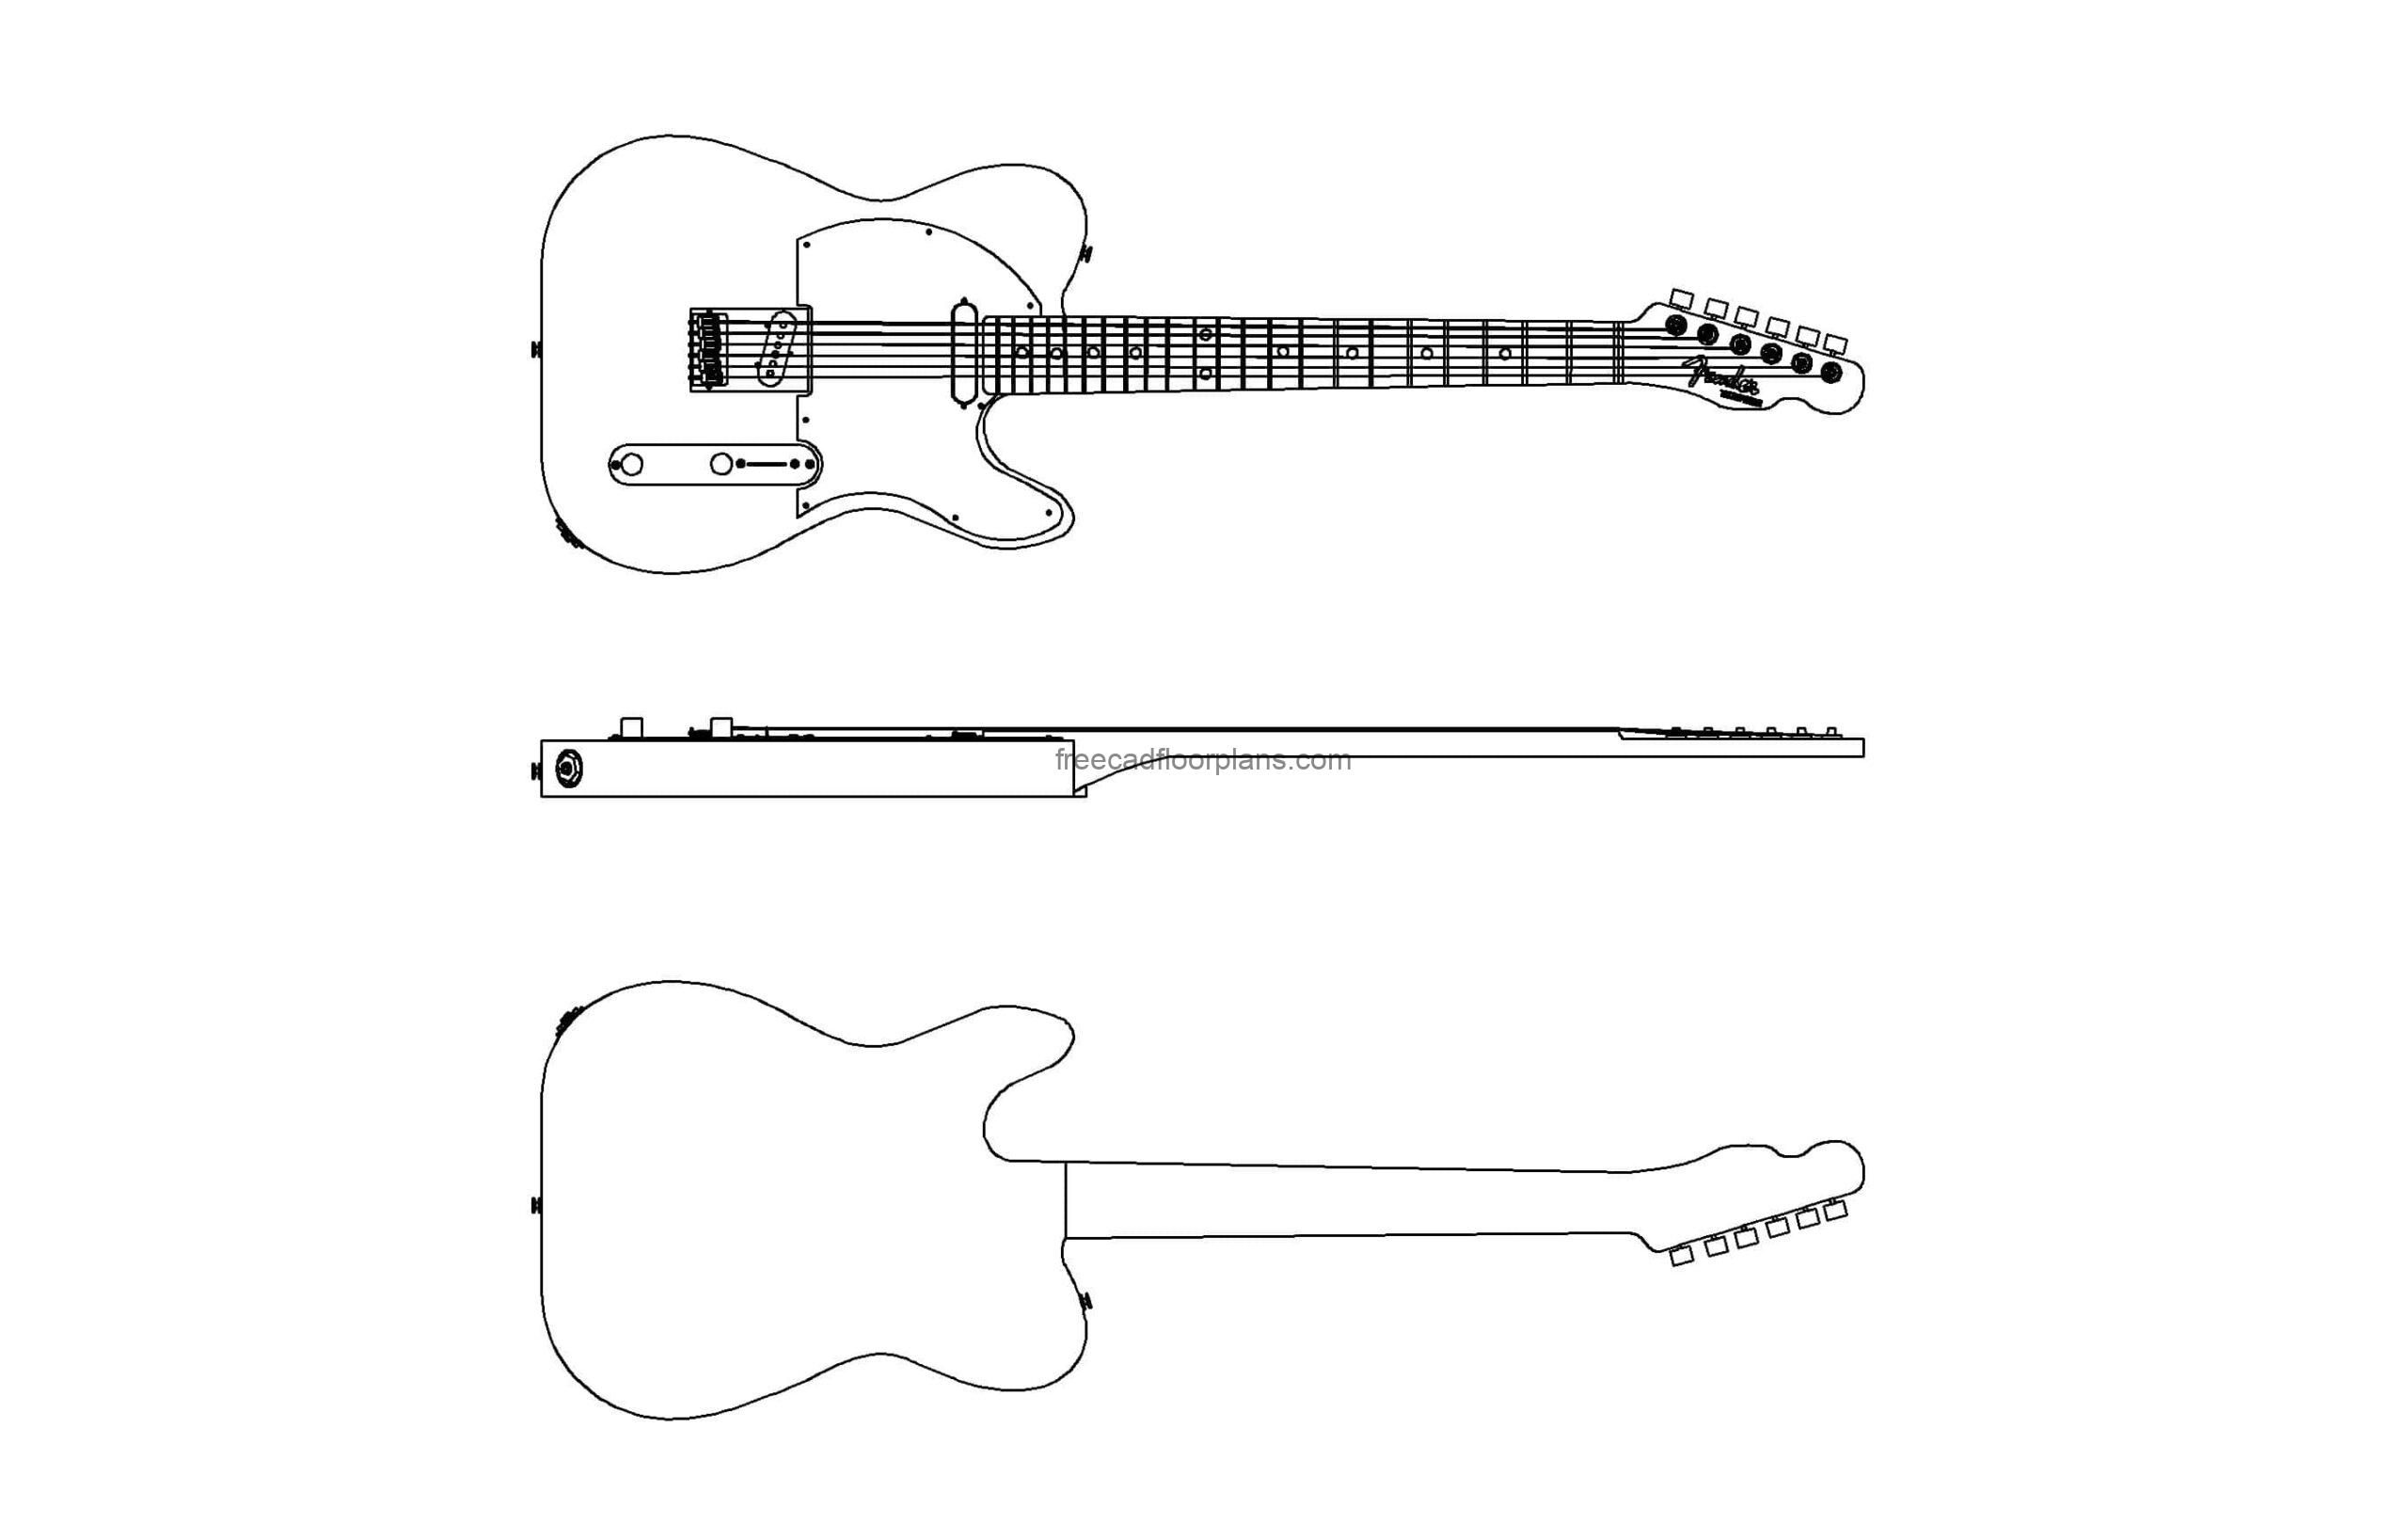 2d autocad drawing of a fender telecaster guitar, all views, dwg file blueprints for free download